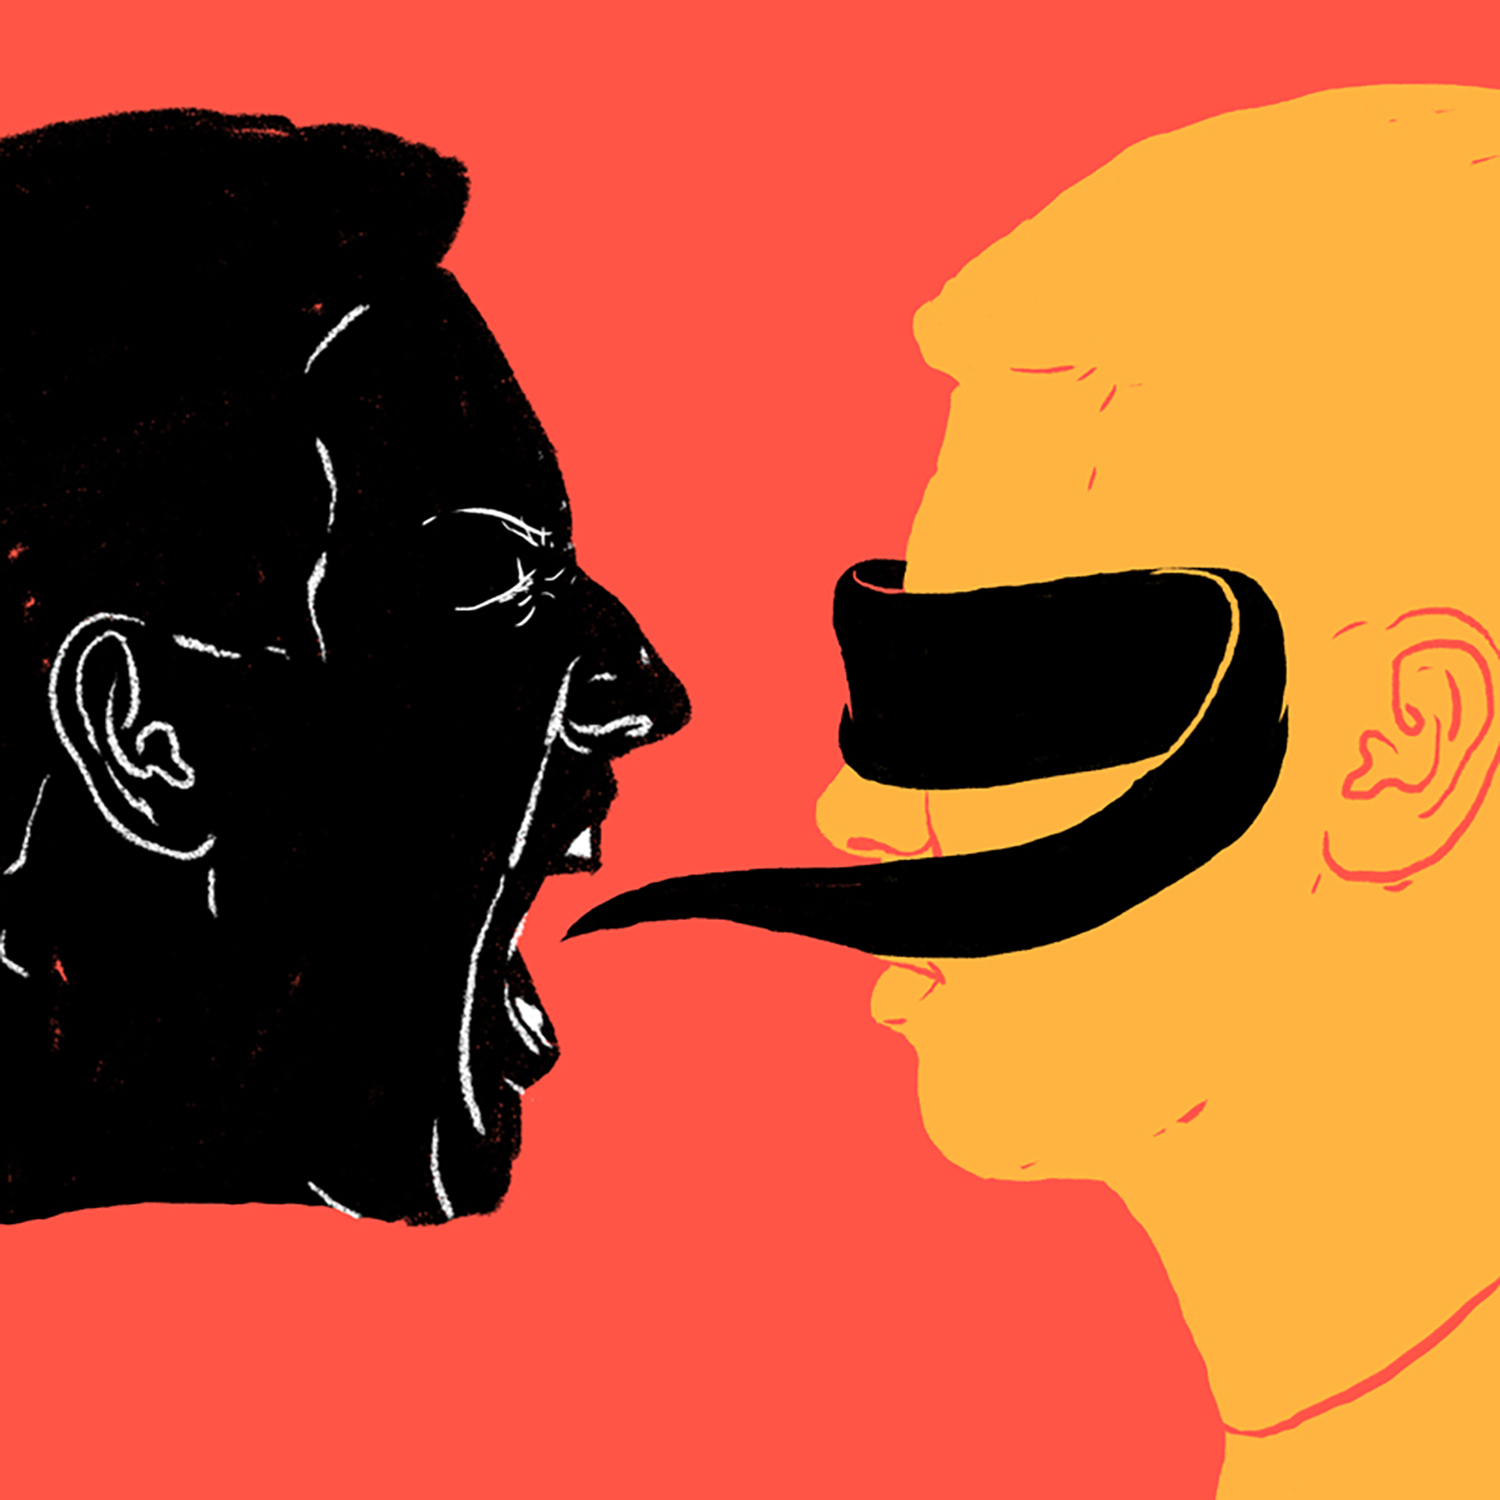 brightly colored illustration of one person whose yelling is obscuring the eyes of a second person with a blindfold.